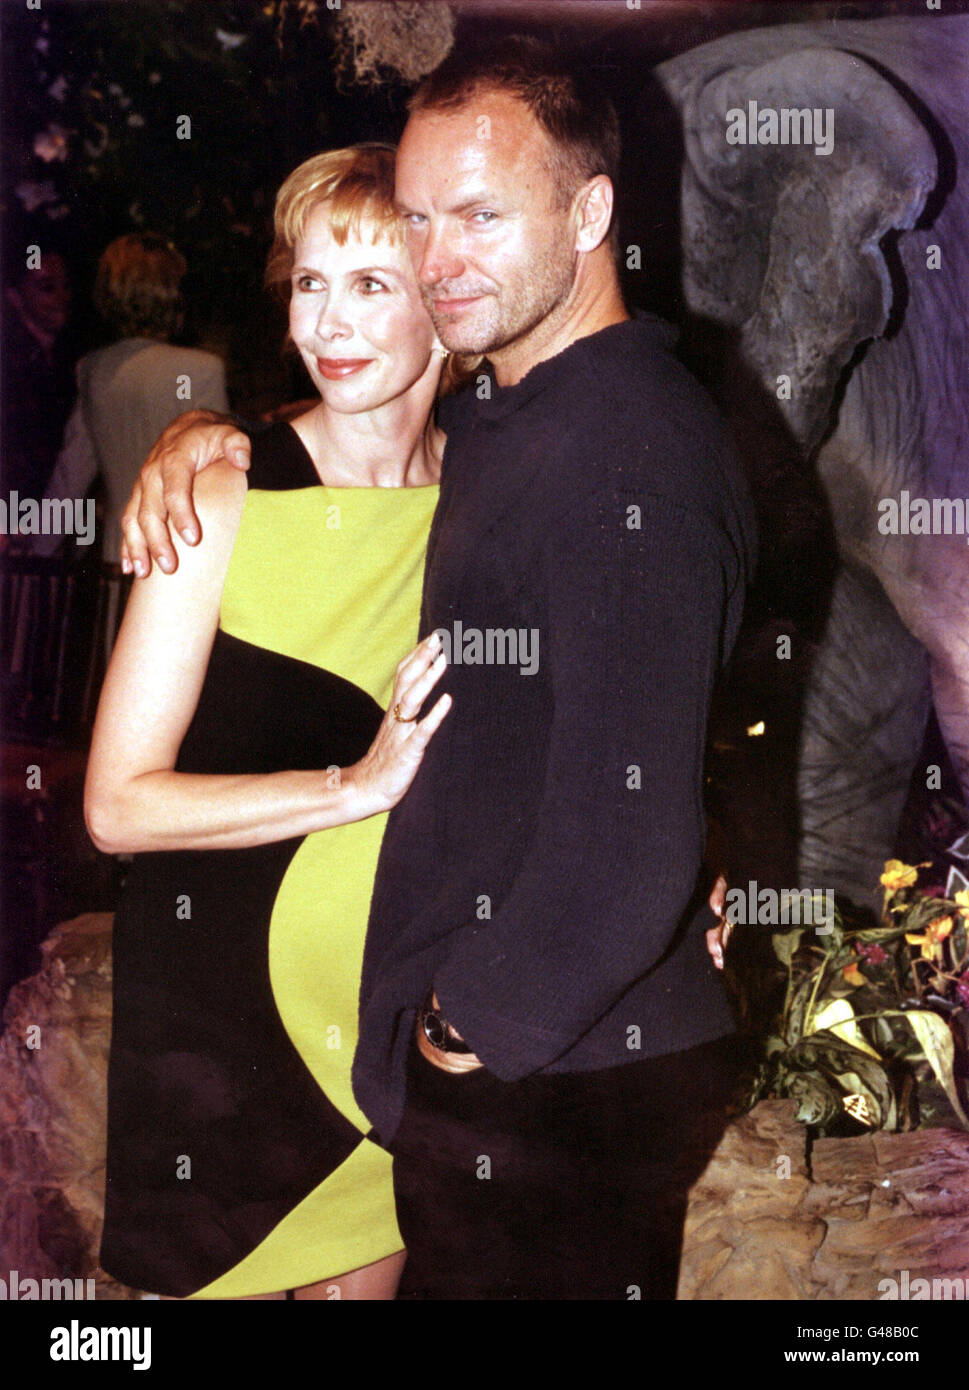 PA NEWS PHOTO : 18/7/97 : STING AND HIS WIFE Trudie STYLER AT THE LAUNCH OF 'CARNIVAL!' , A CHARITY CD IN AID OF THE RAINFOREST FOUNDATION, PRODUCED BY Trudie STYLER. PHOTO BY PETER JORDAN. Stock Photo